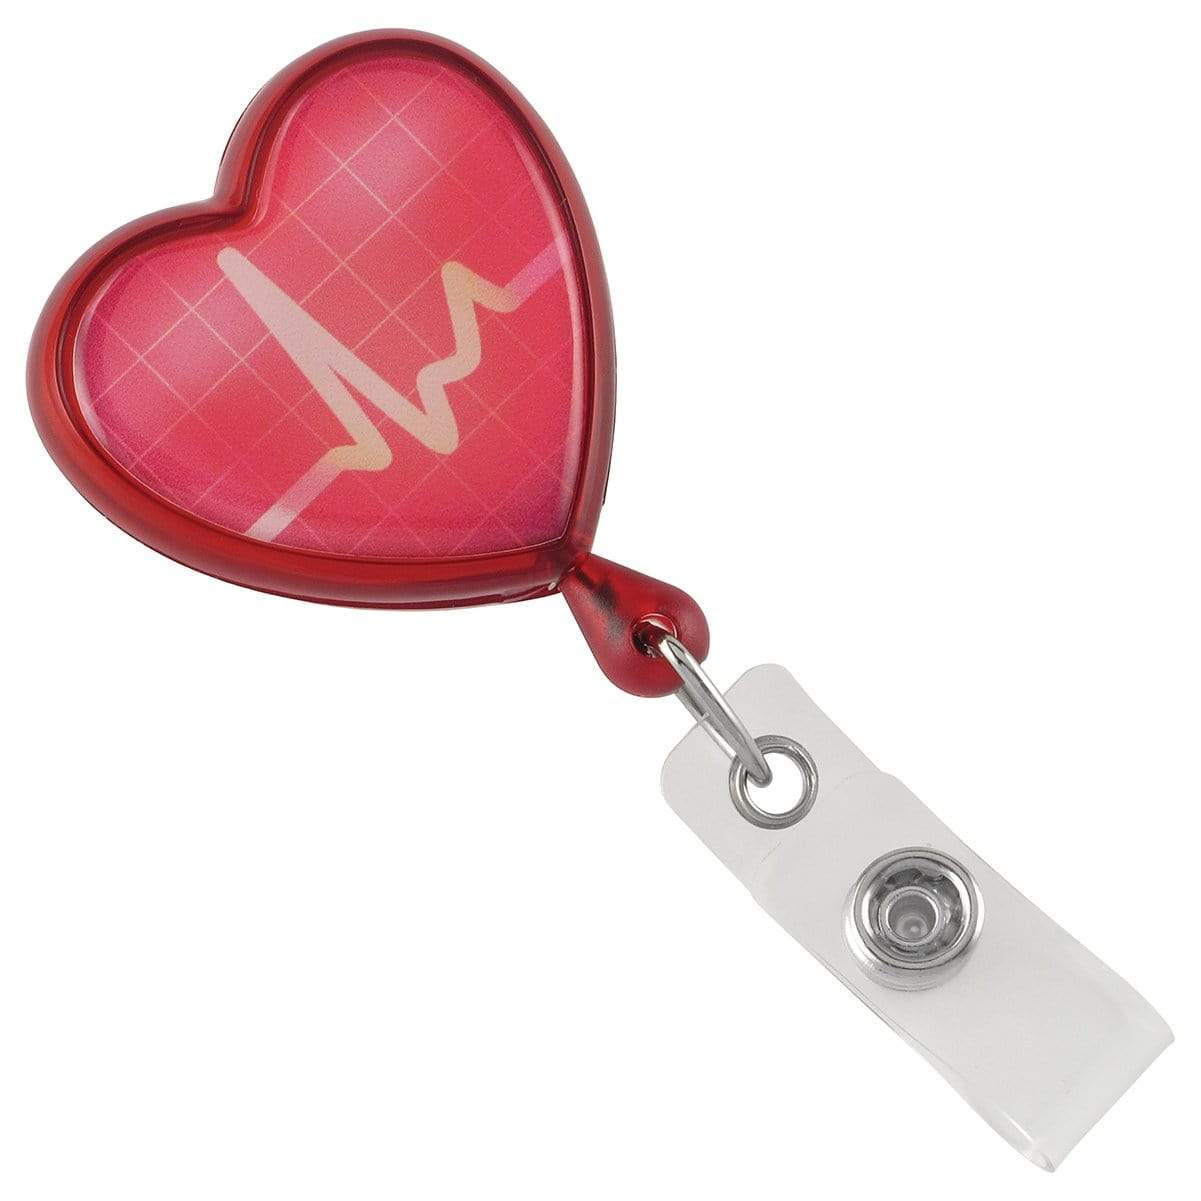 Translucent Red Heart Shaped EKG Themed Badge Reel with Swivel Spring Clip (2120-76XX) 2120-7636